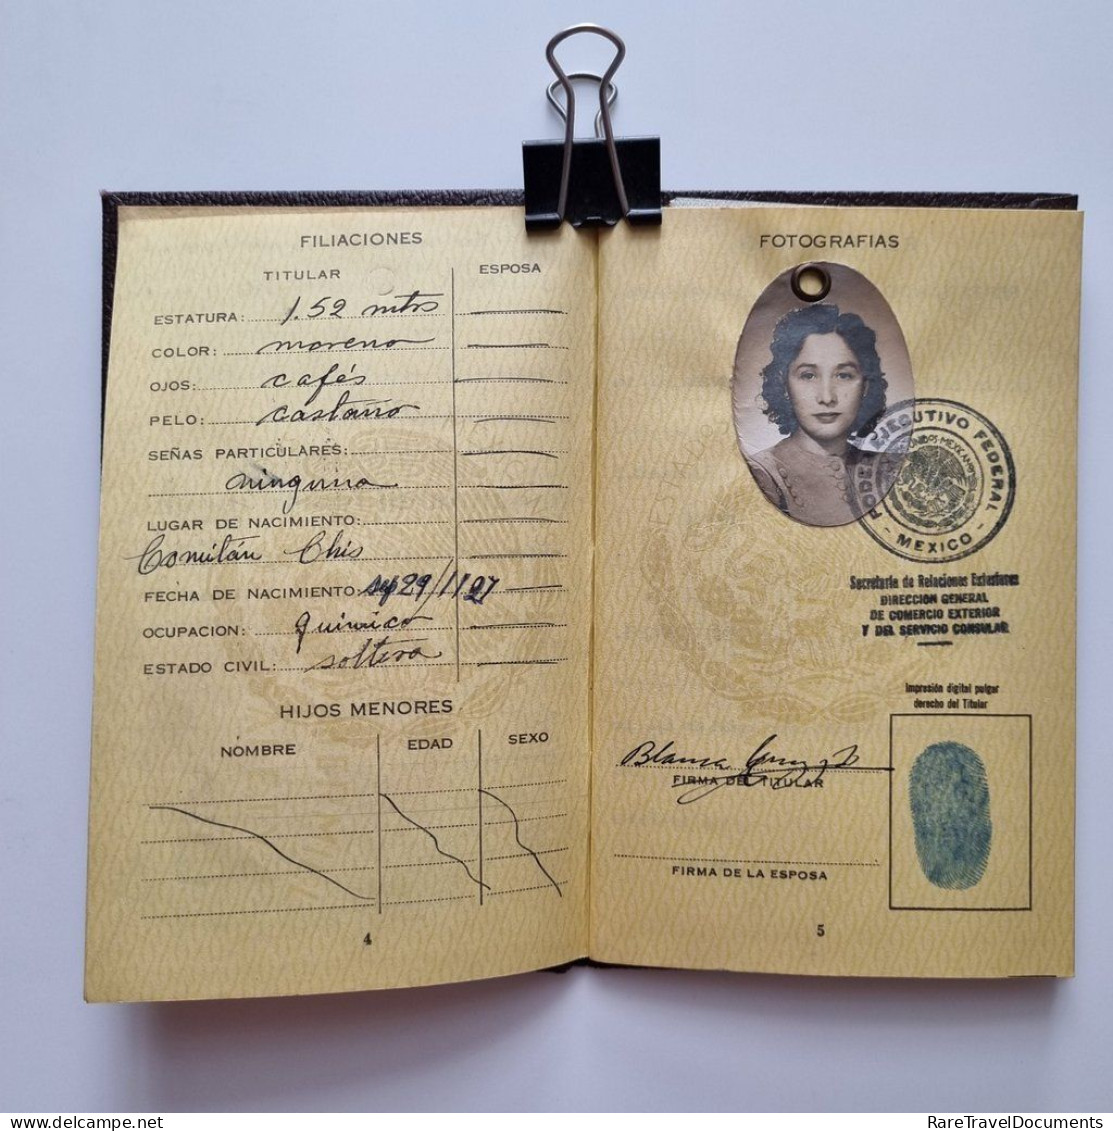 Fantastic MEXICO 1941 Passport Of A Beautiful Woman - Condition! - Free Shipping! - Historical Documents